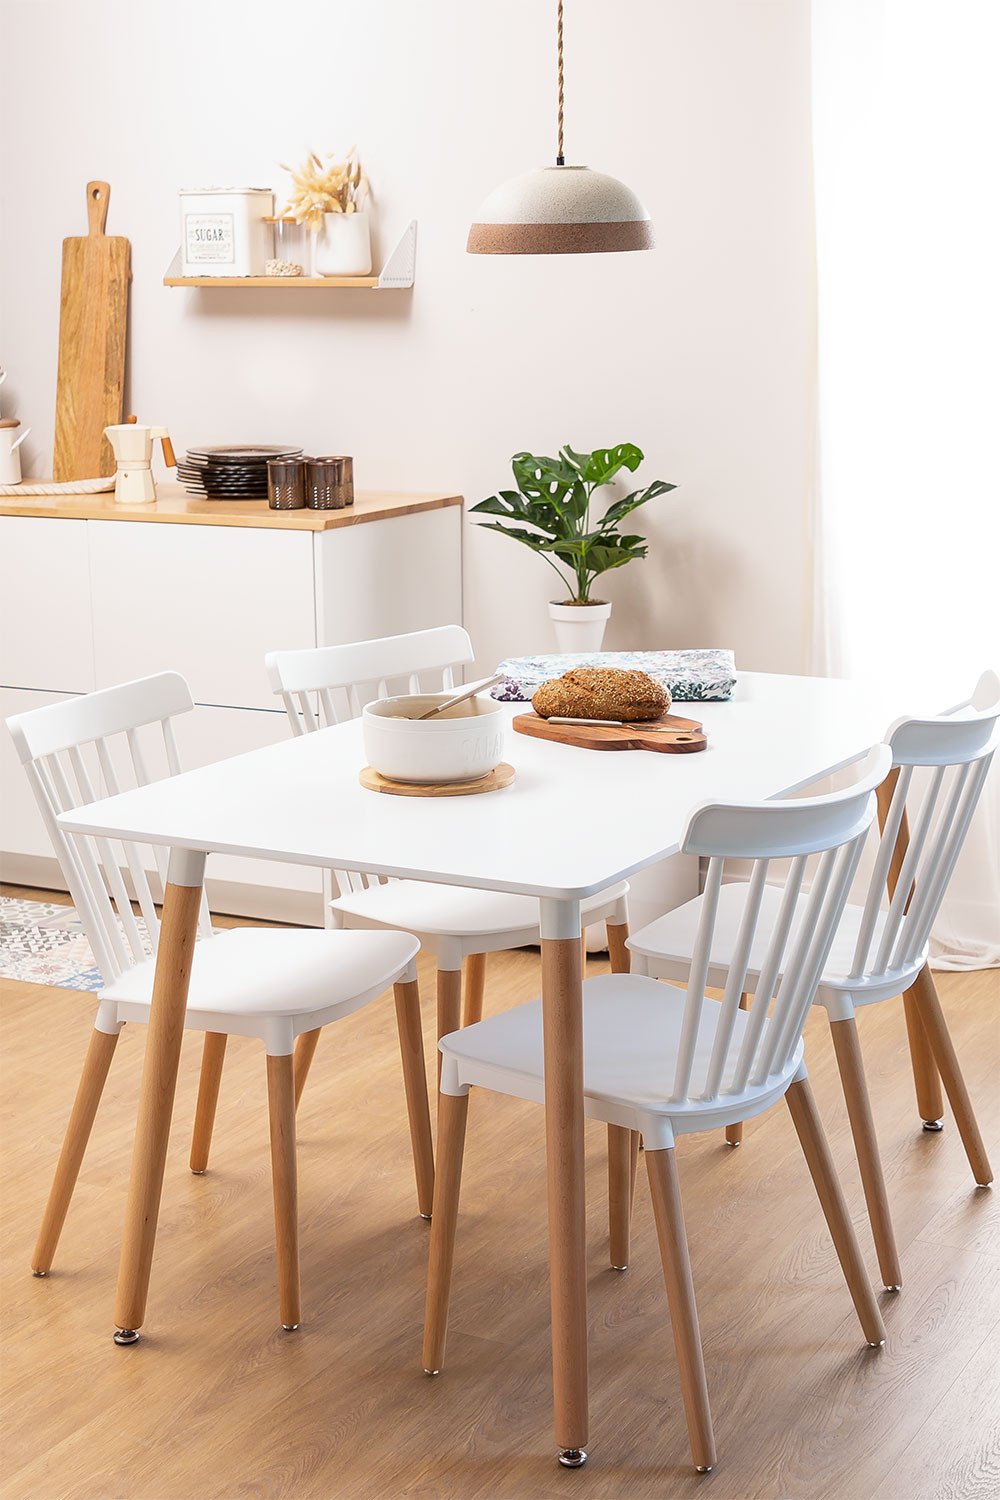 Rectangular Wooden Dining Table 140 X, How Long Should A Dining Room Table Be To Seat 80cm